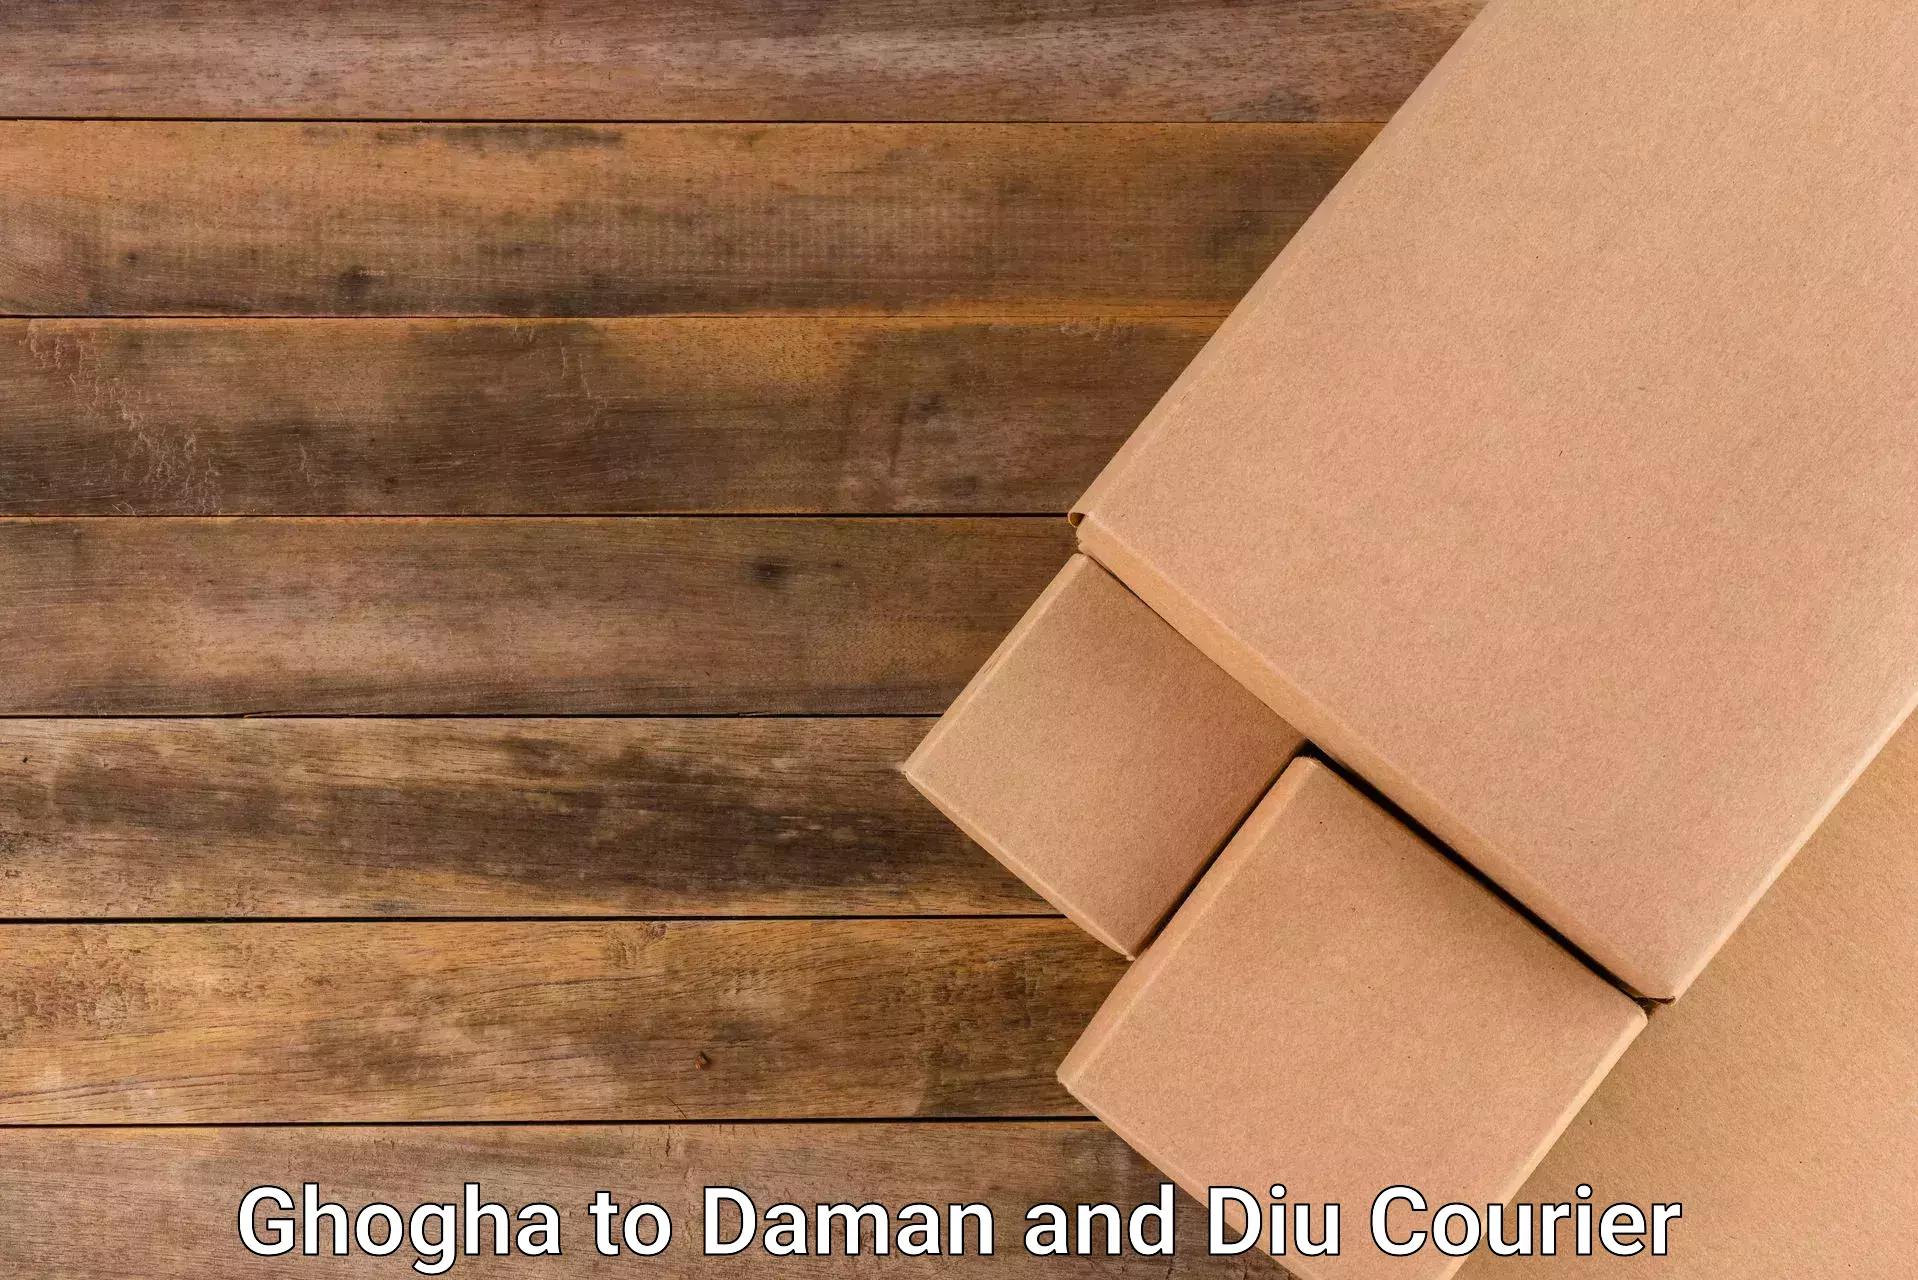 Express delivery network Ghogha to Daman and Diu